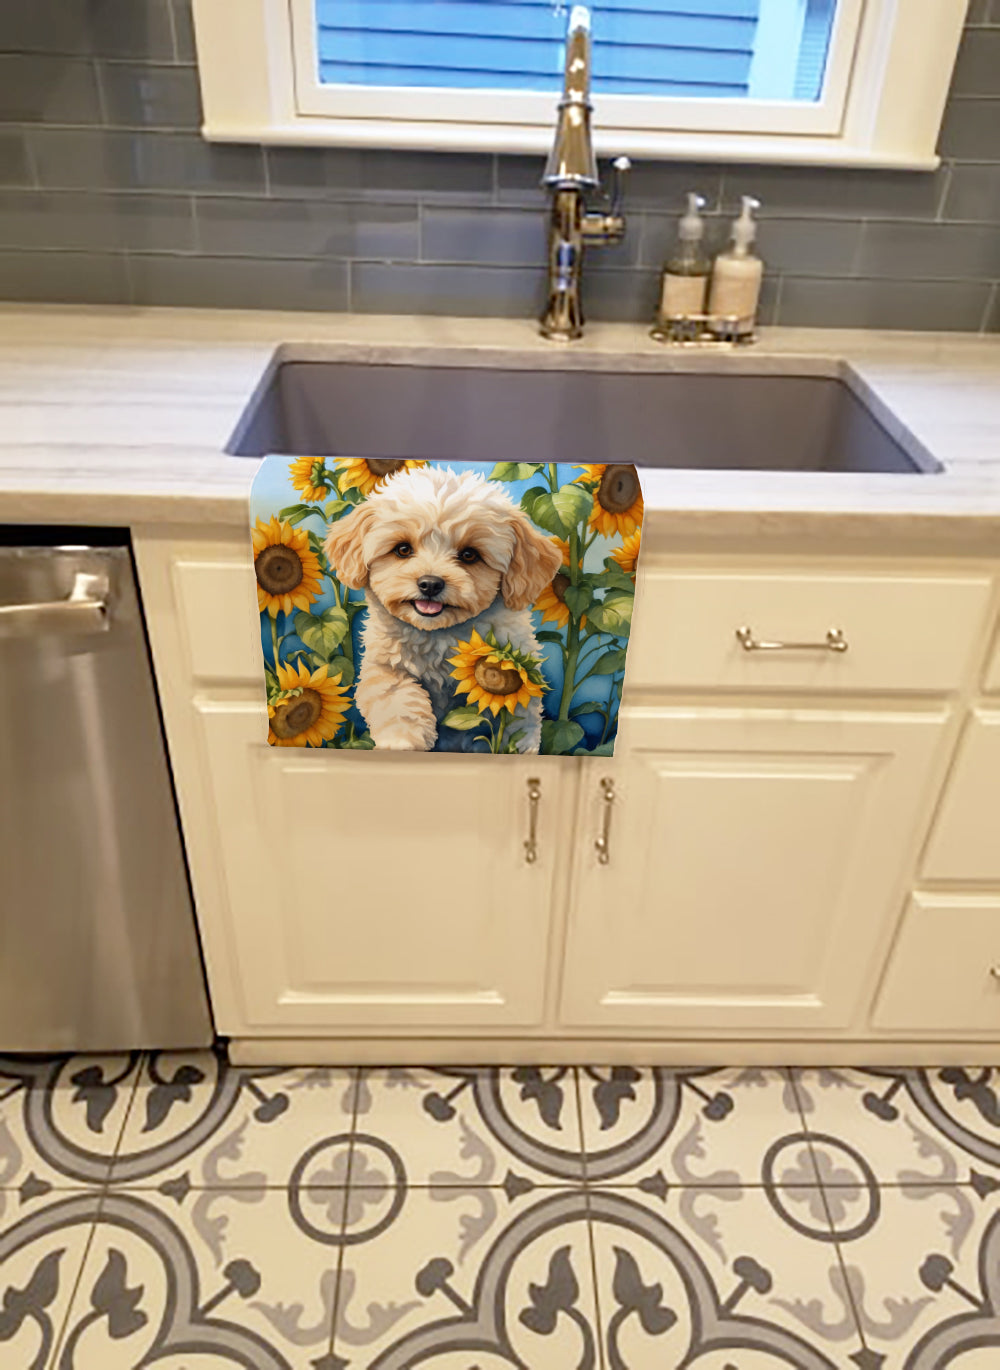 Buy this Maltipoo in Sunflowers Kitchen Towel